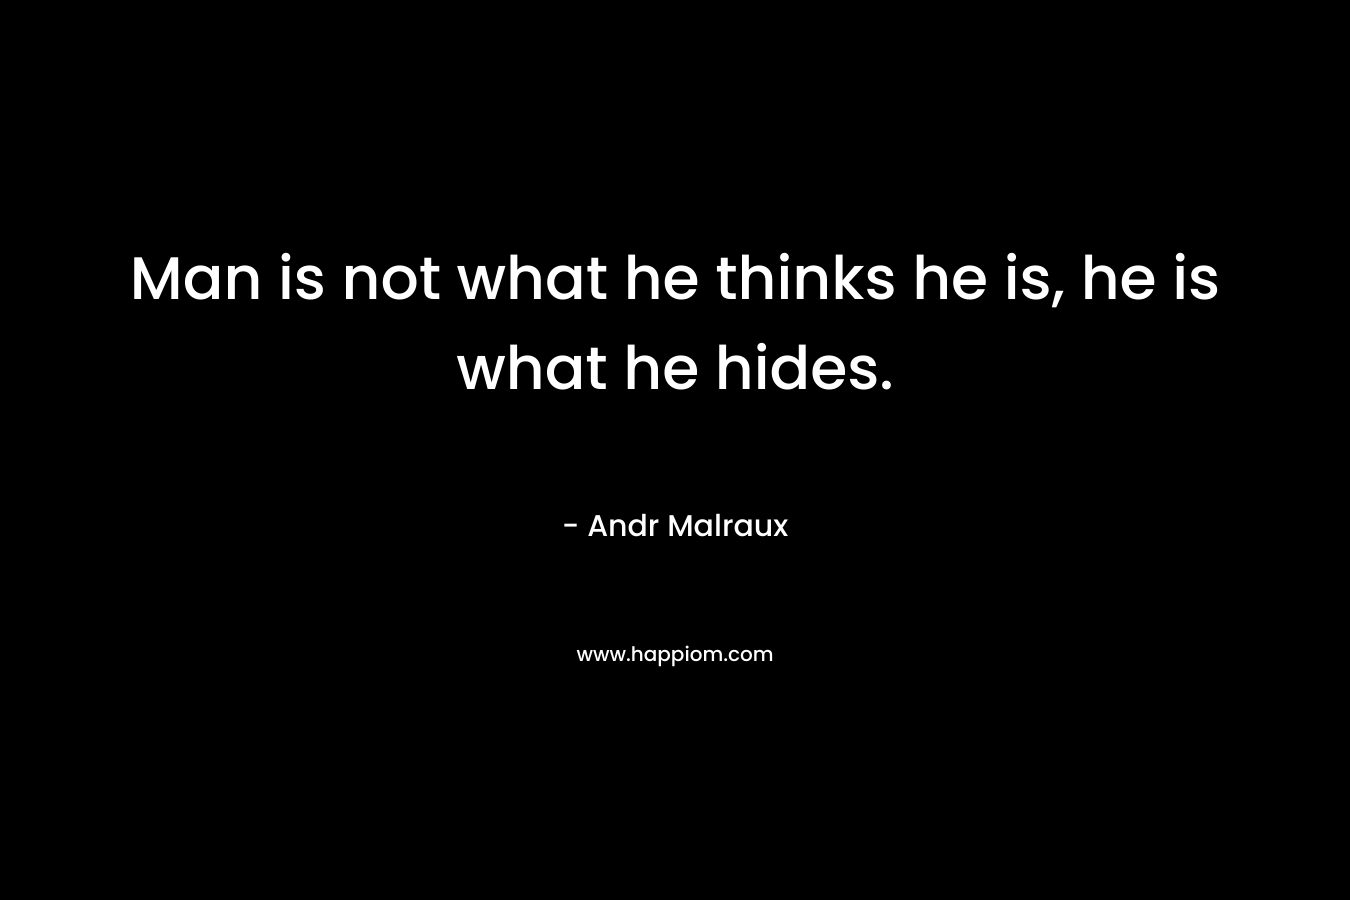 Man is not what he thinks he is, he is what he hides.